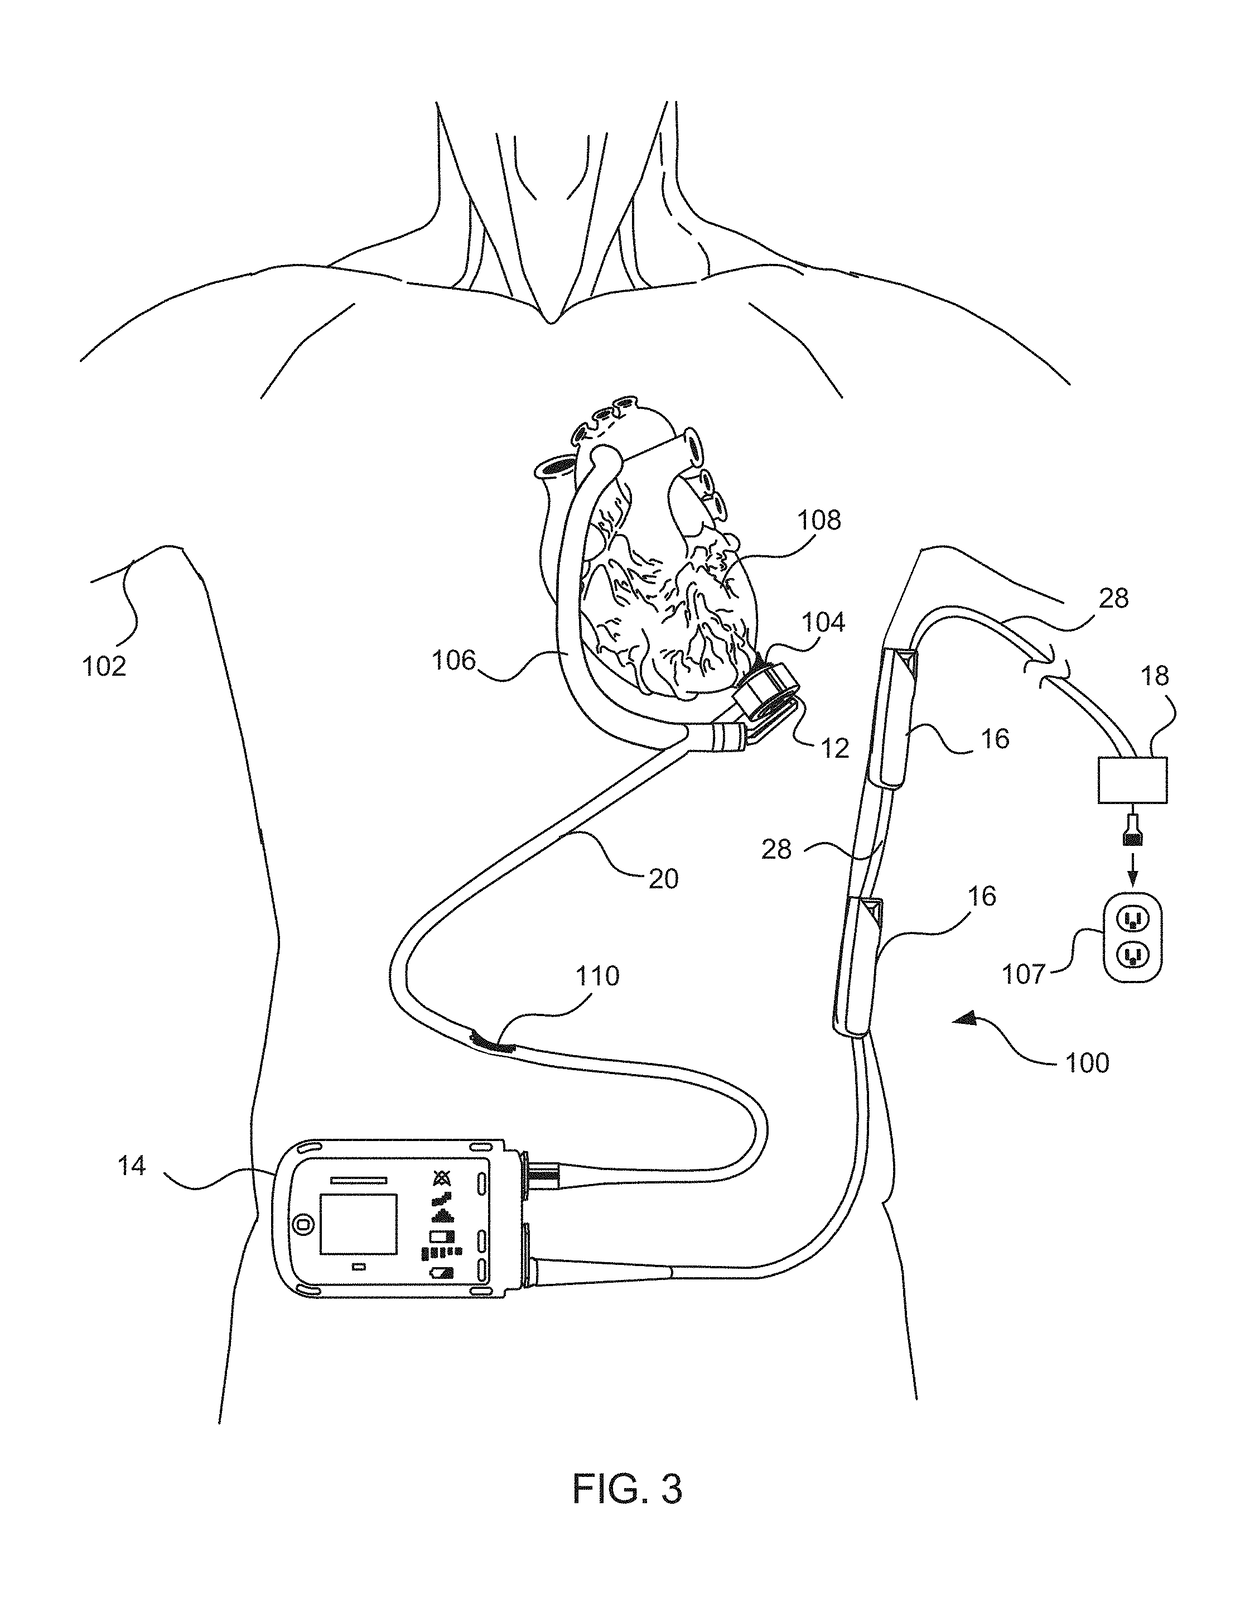 Connectors and cables for use with ventricle assist systems